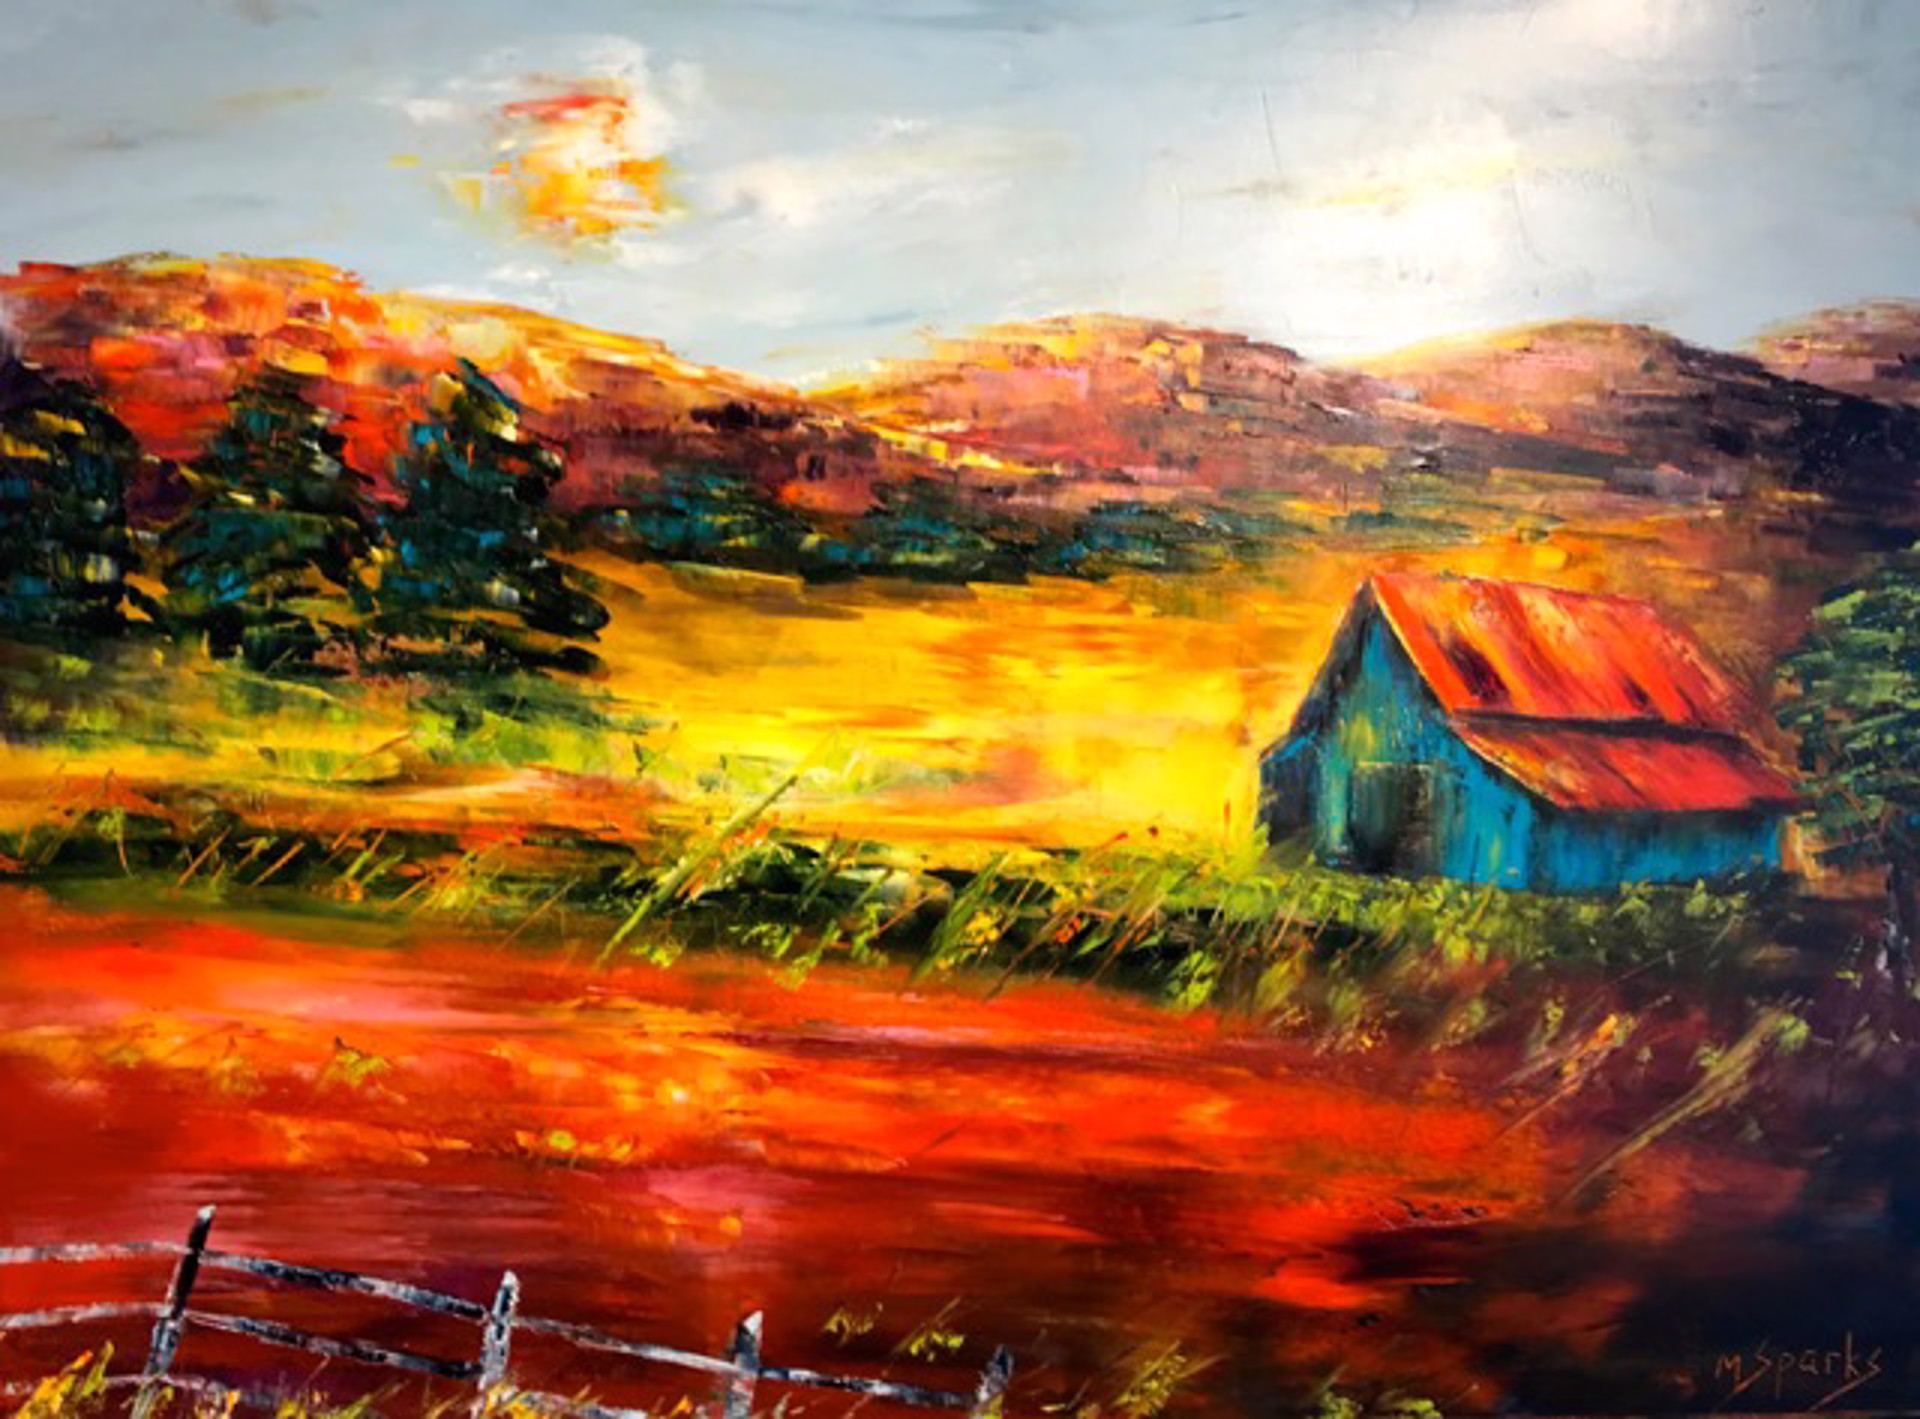 Vibrant Mountain View by Marilyn Sparks